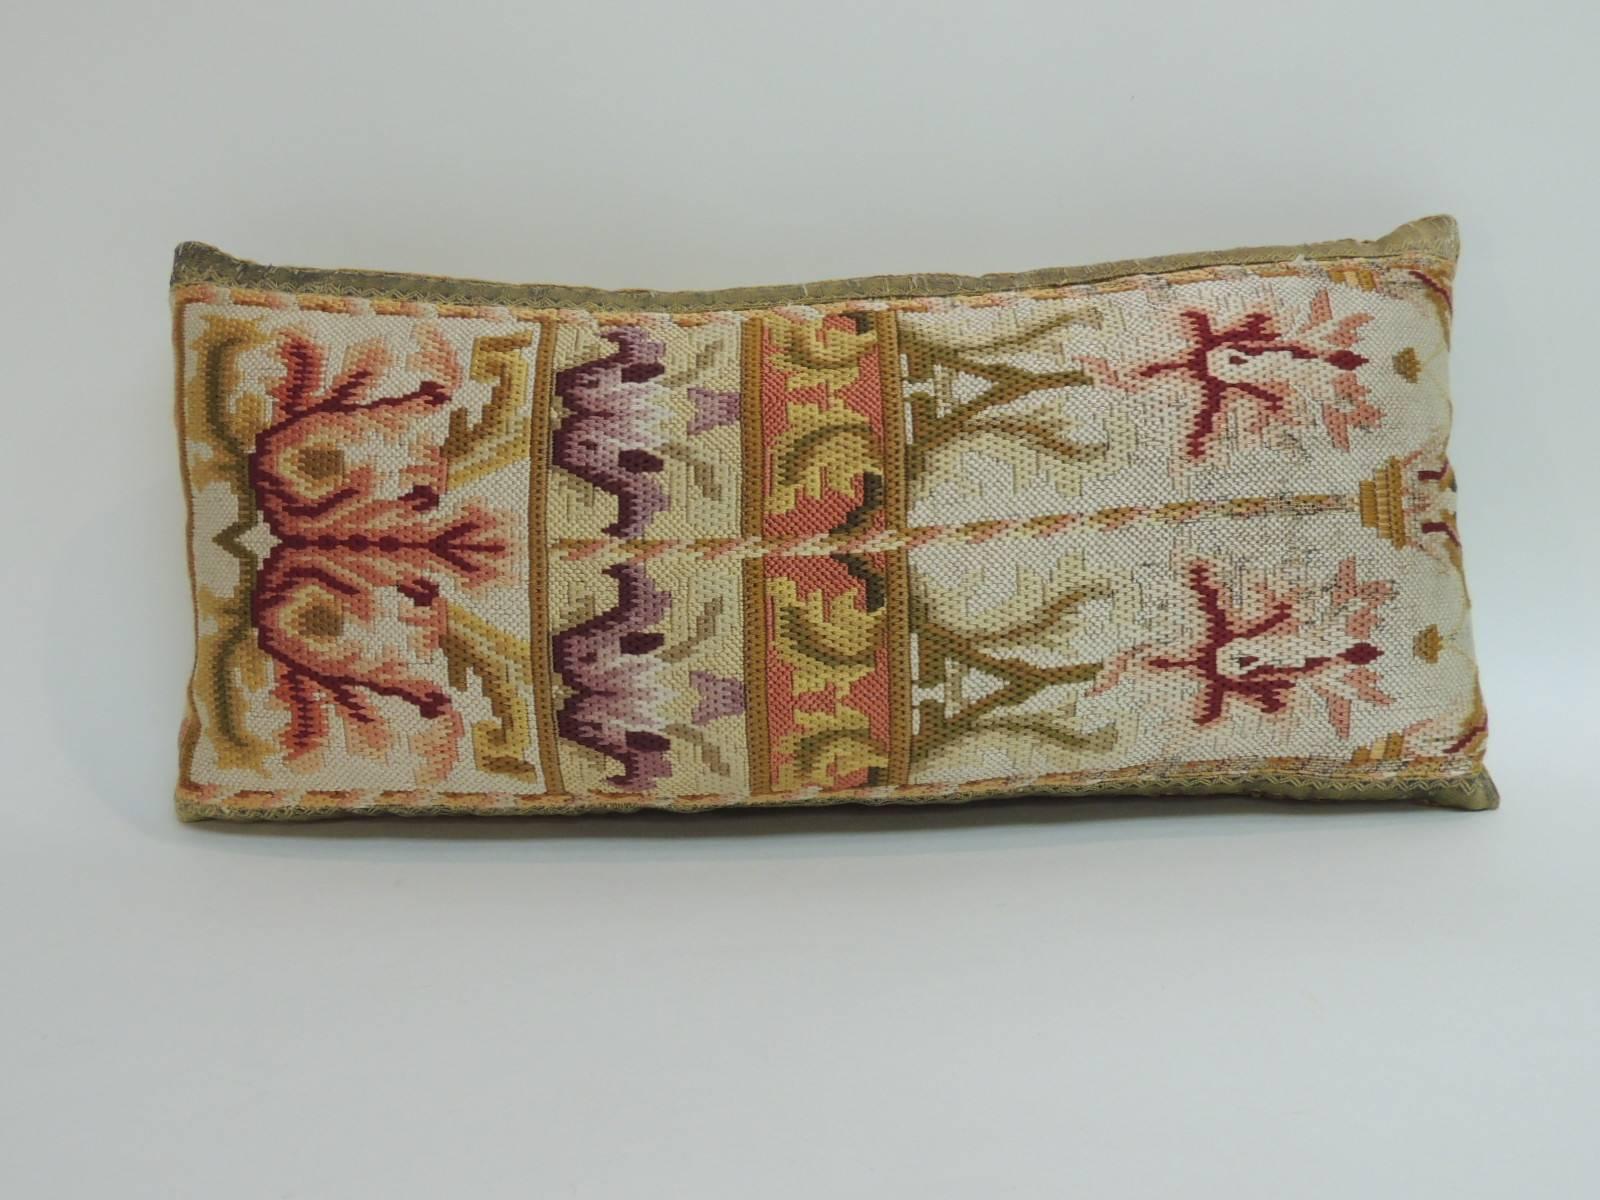 This item is part of our 7Th Anniversary SALE:
19th Century Tapestry Decorative Lumbar Pillow, embellished with antique 19th century metallic thread gold trim and 19th century golden tone silk velvet backing. Throw pillow depicts acanthus leaves and